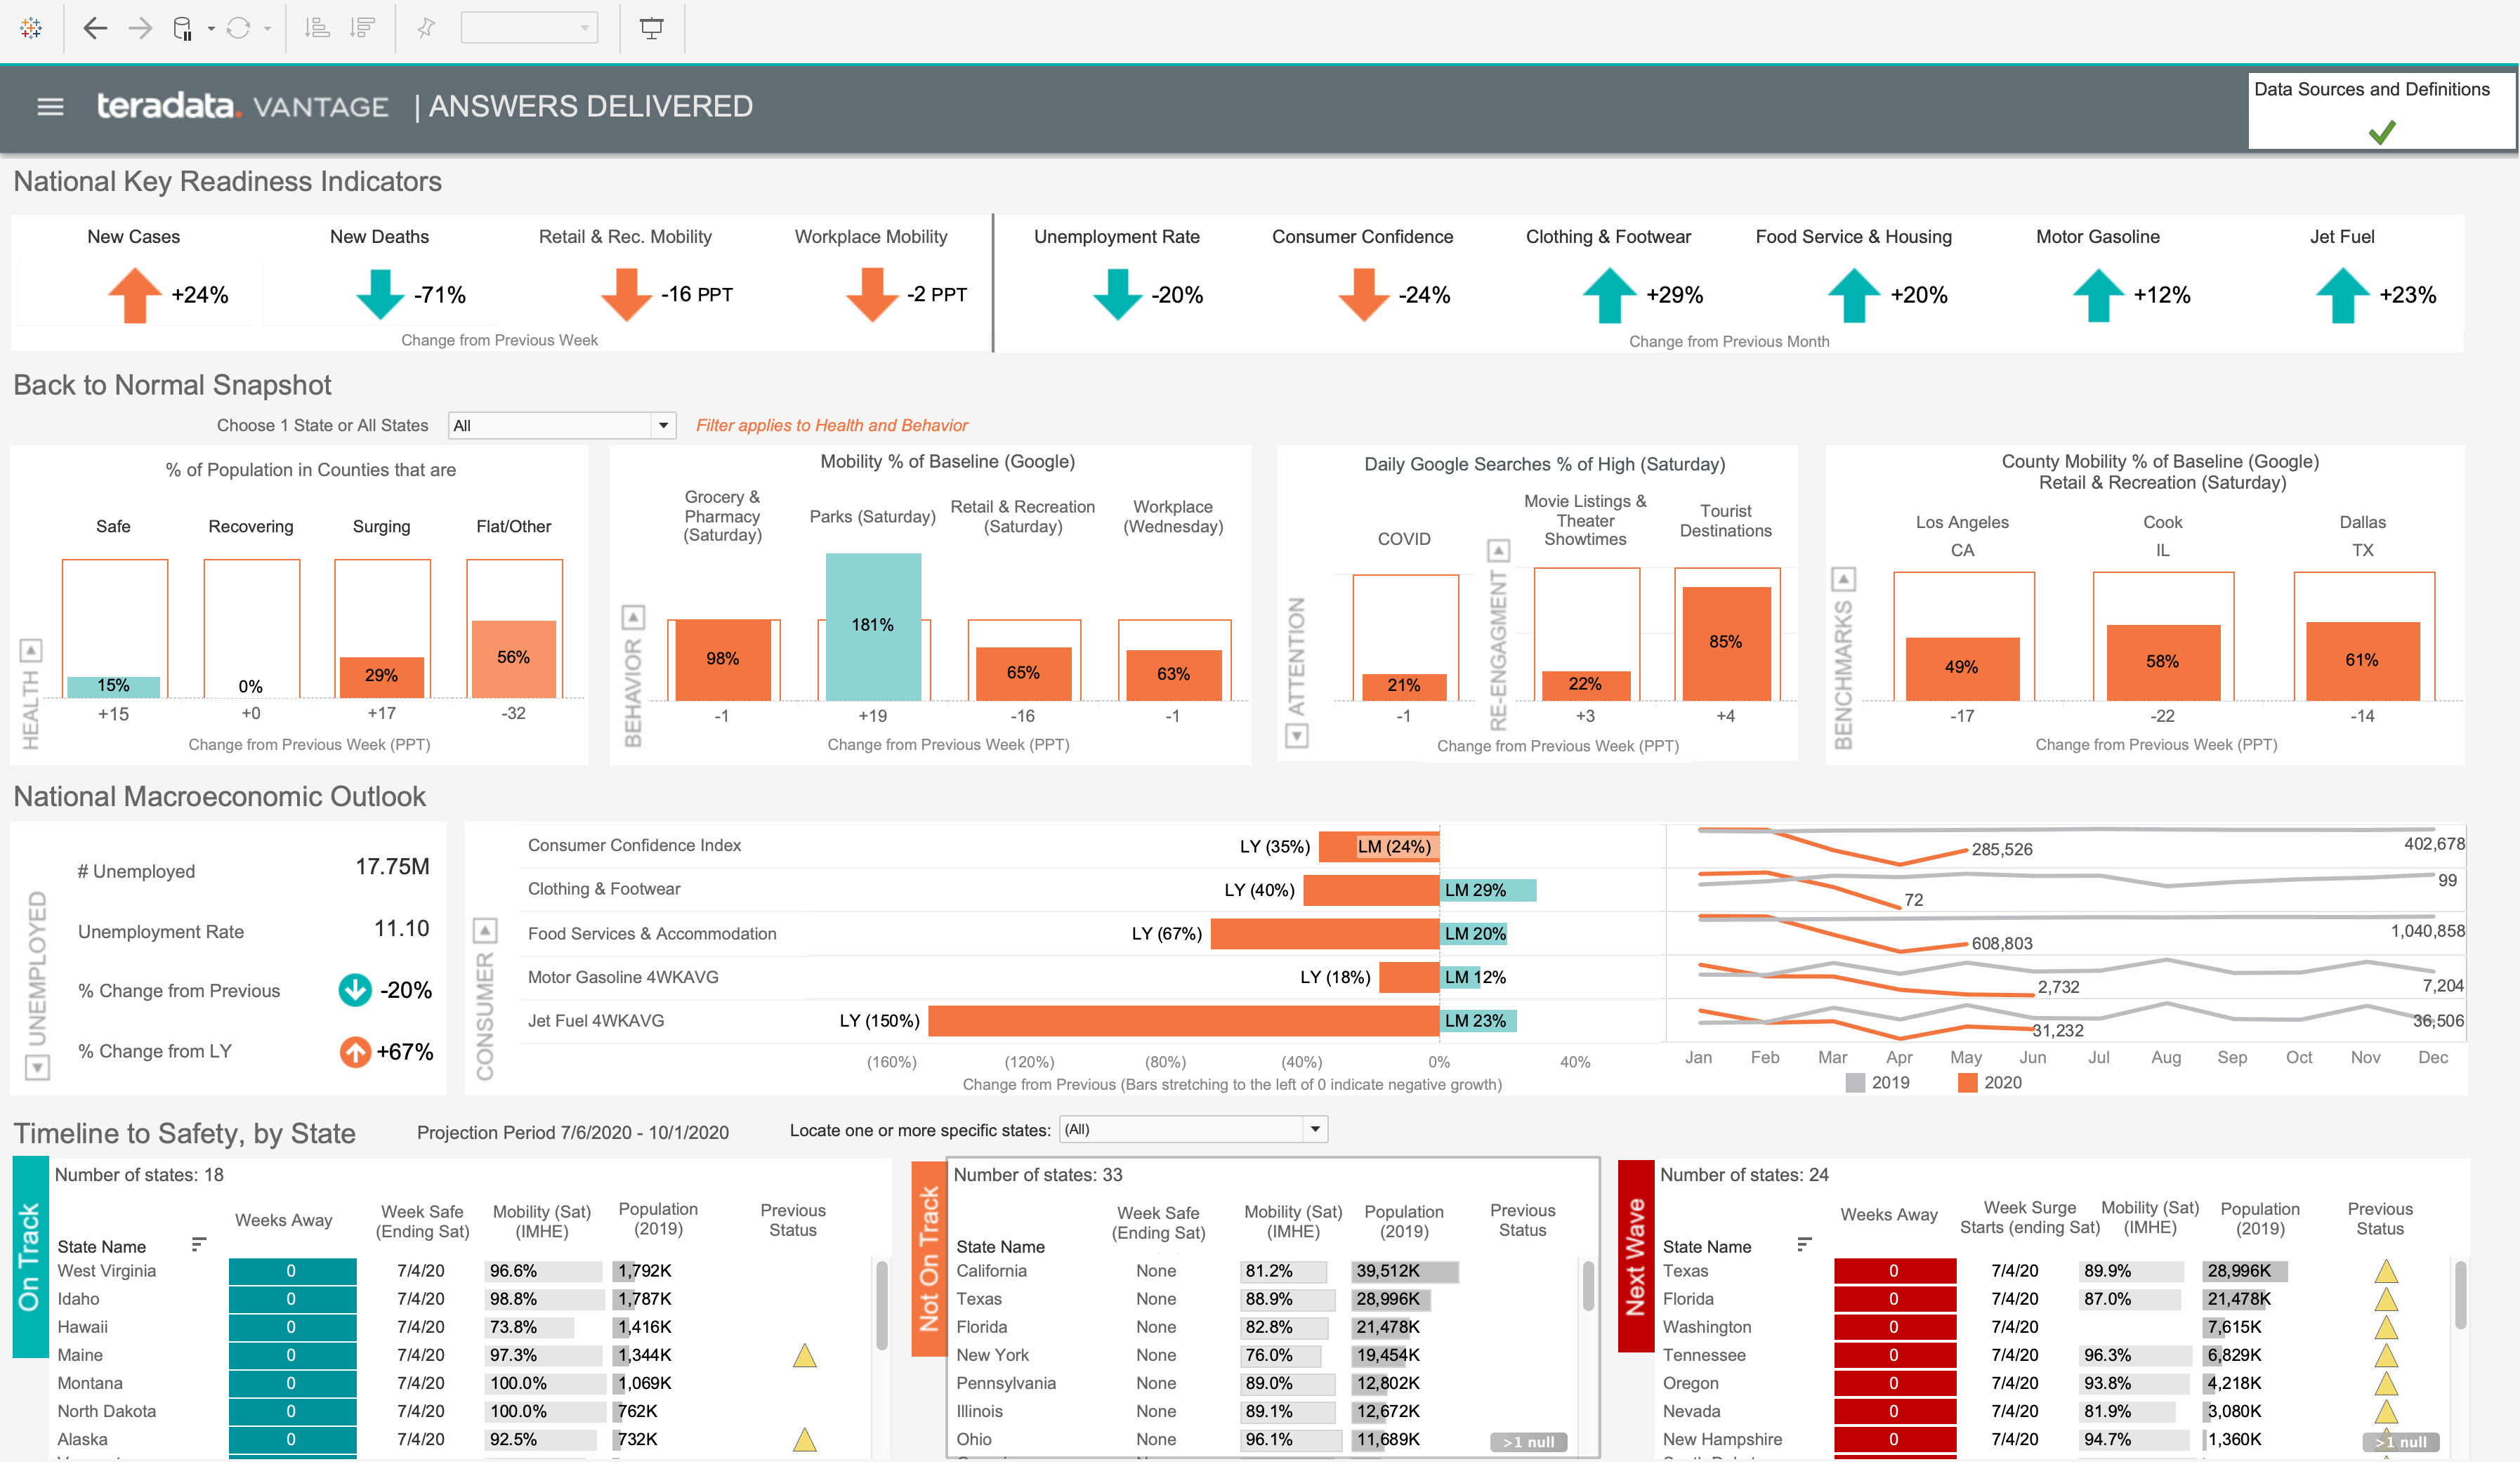 Vantage resilience dashboard provides insights to retailers